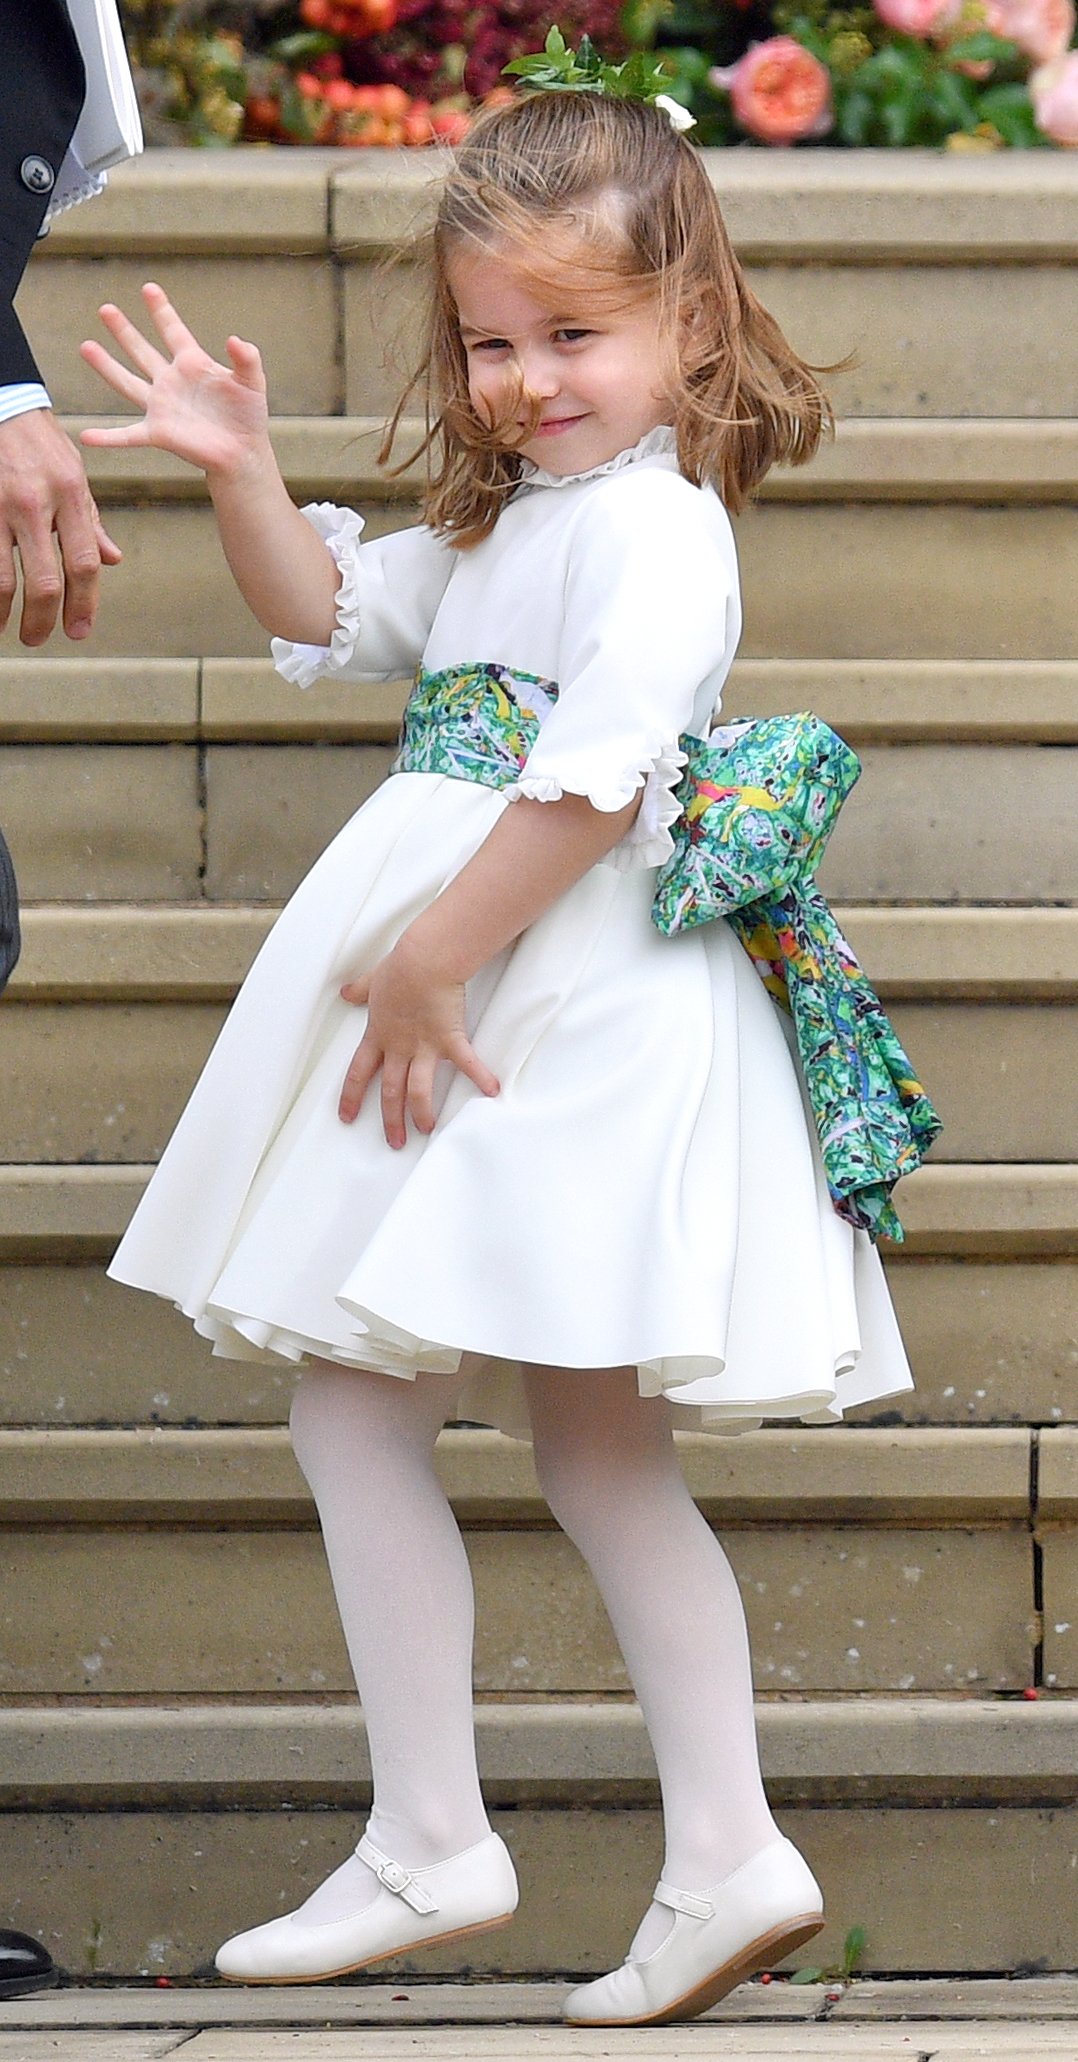 Princess Charlotte outside St. George's Chapel at Princess Eugenie's wedding to Jack Brooksbank | Photo: Getty Images